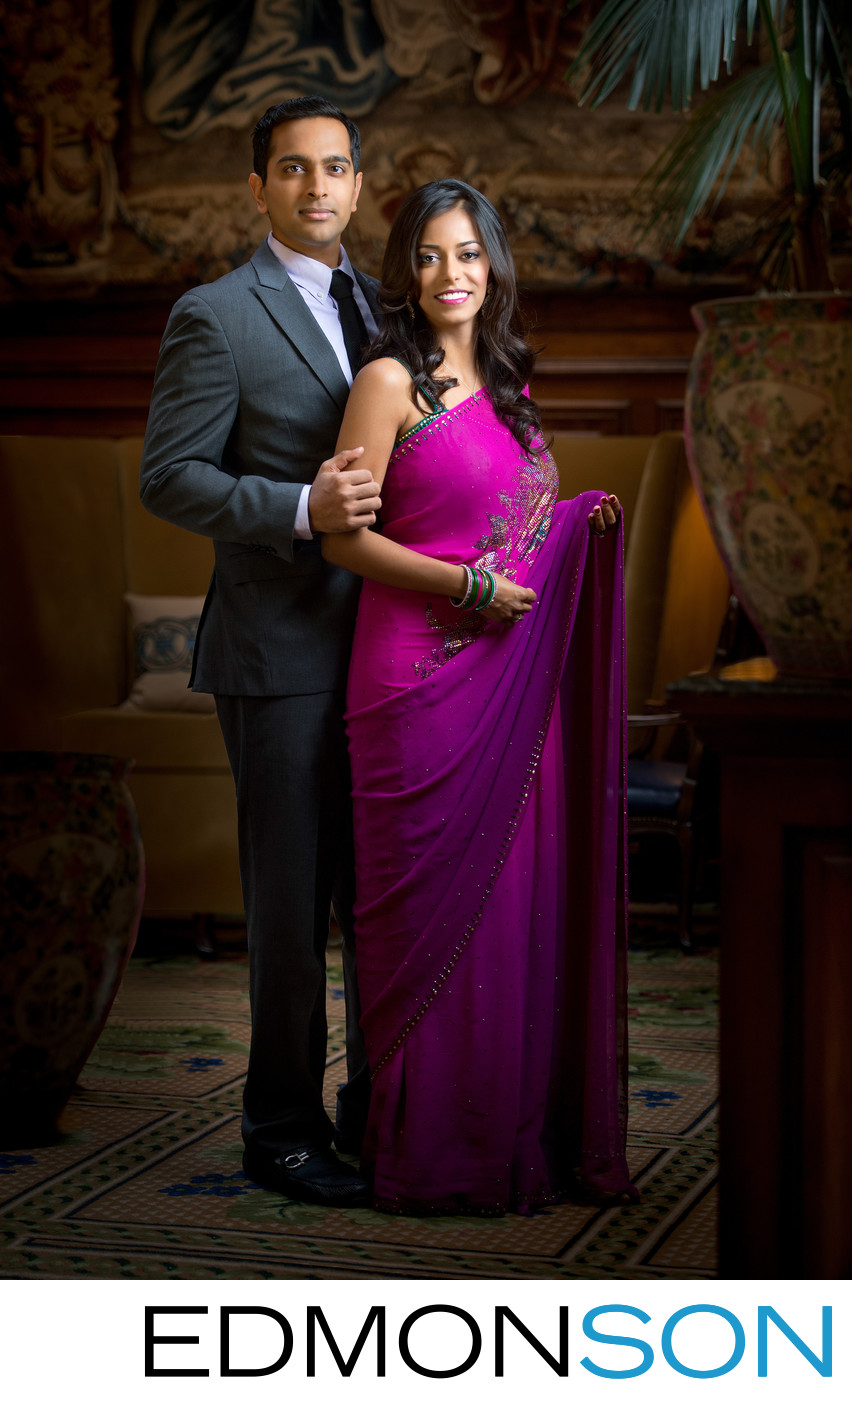 Indian Wedding Engagement Portrait In Formal Setting